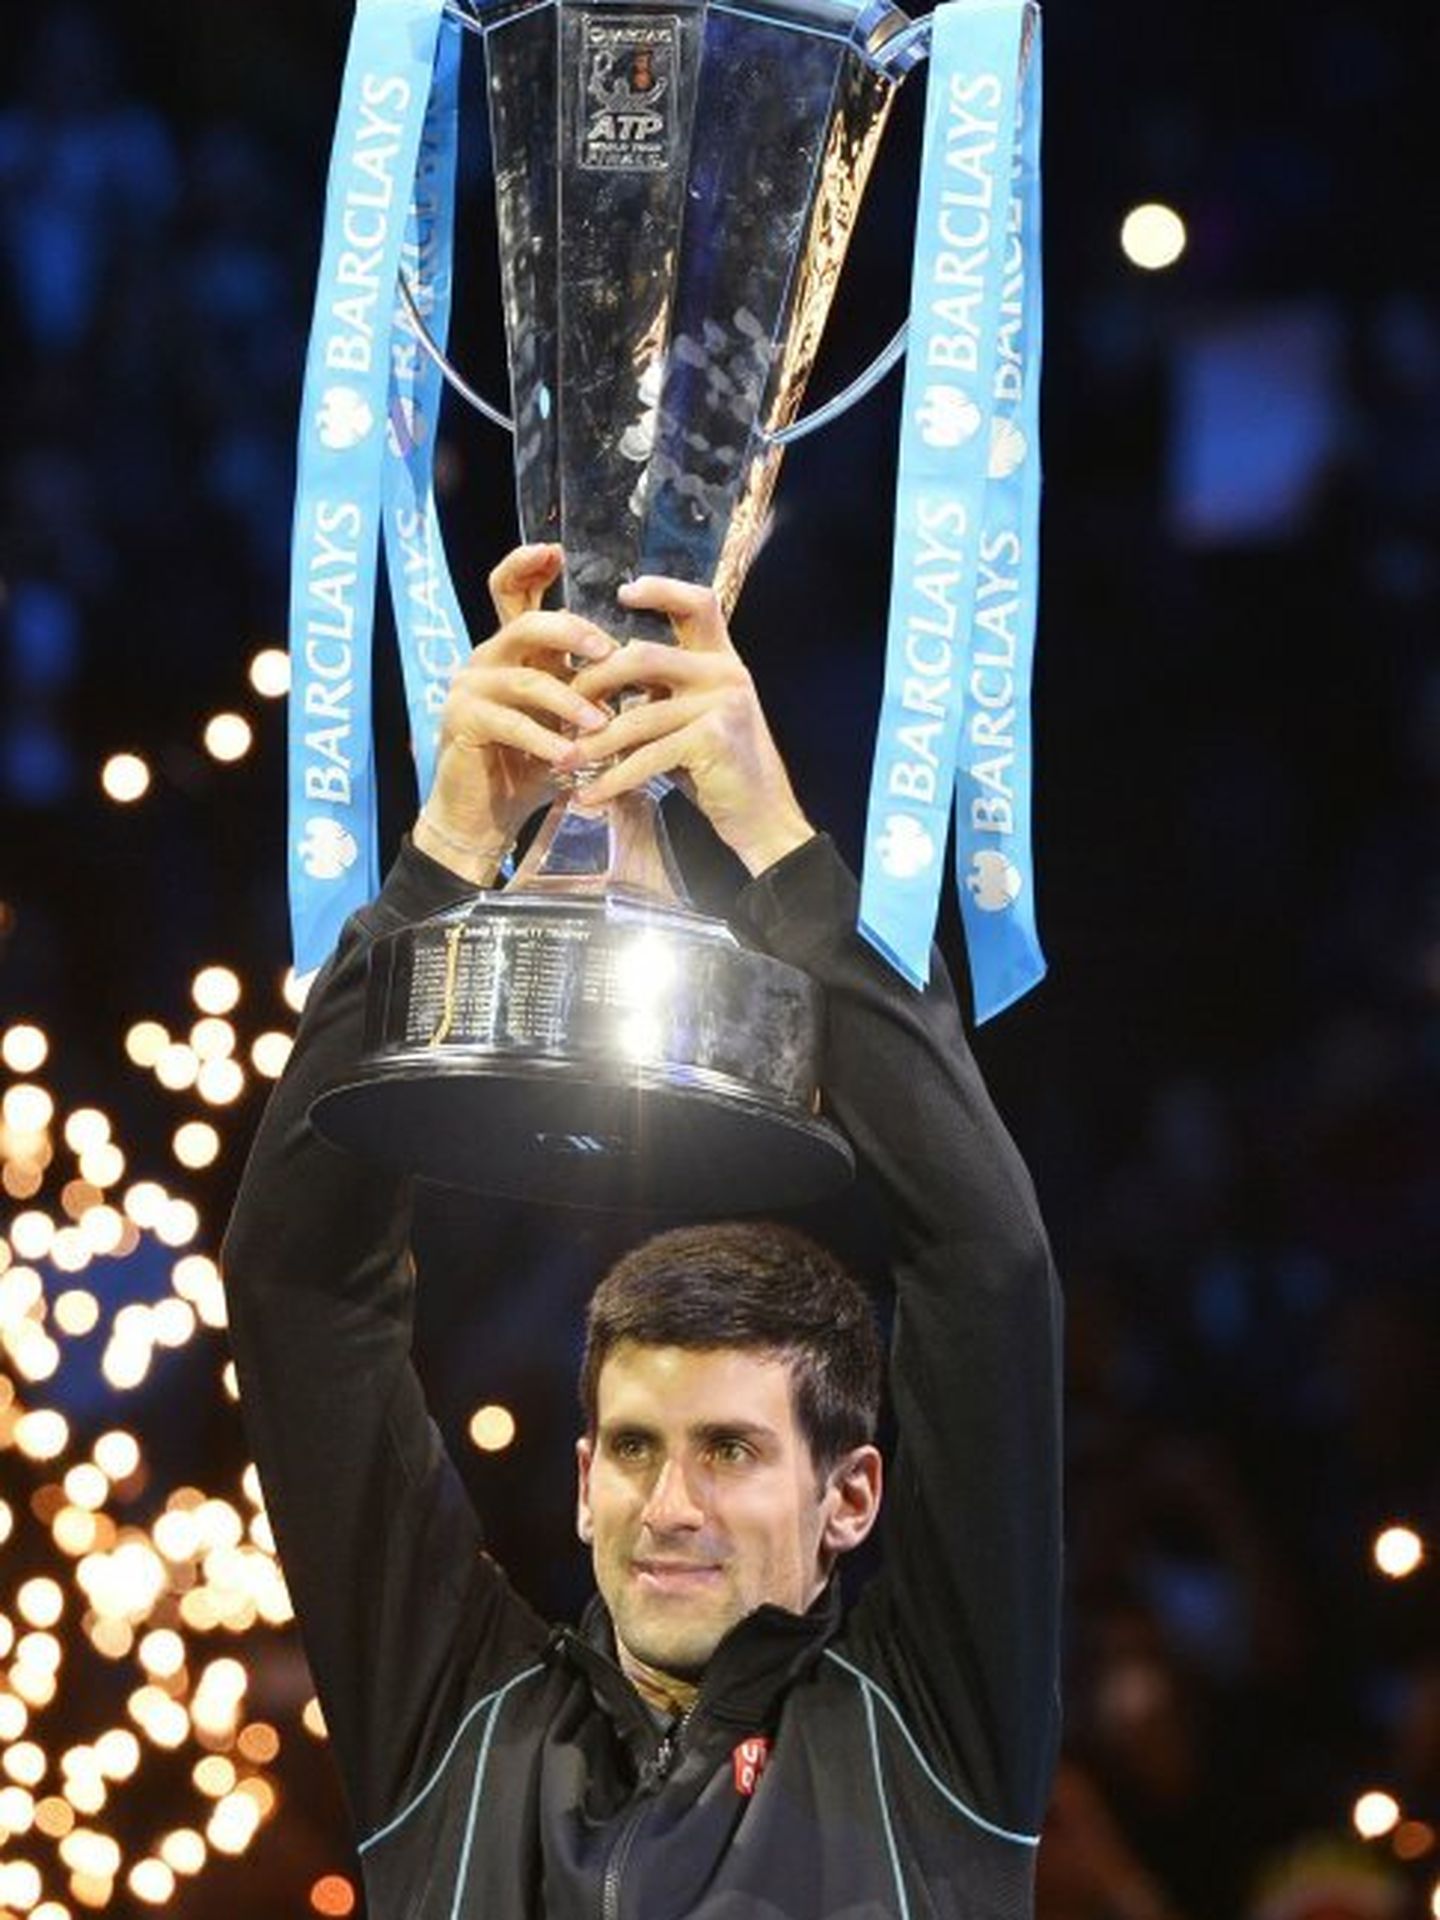 Djokovic of serbia raises the trophy after defeating nadal of spain in their men's final singles tennis match at the atp world tour finals in london